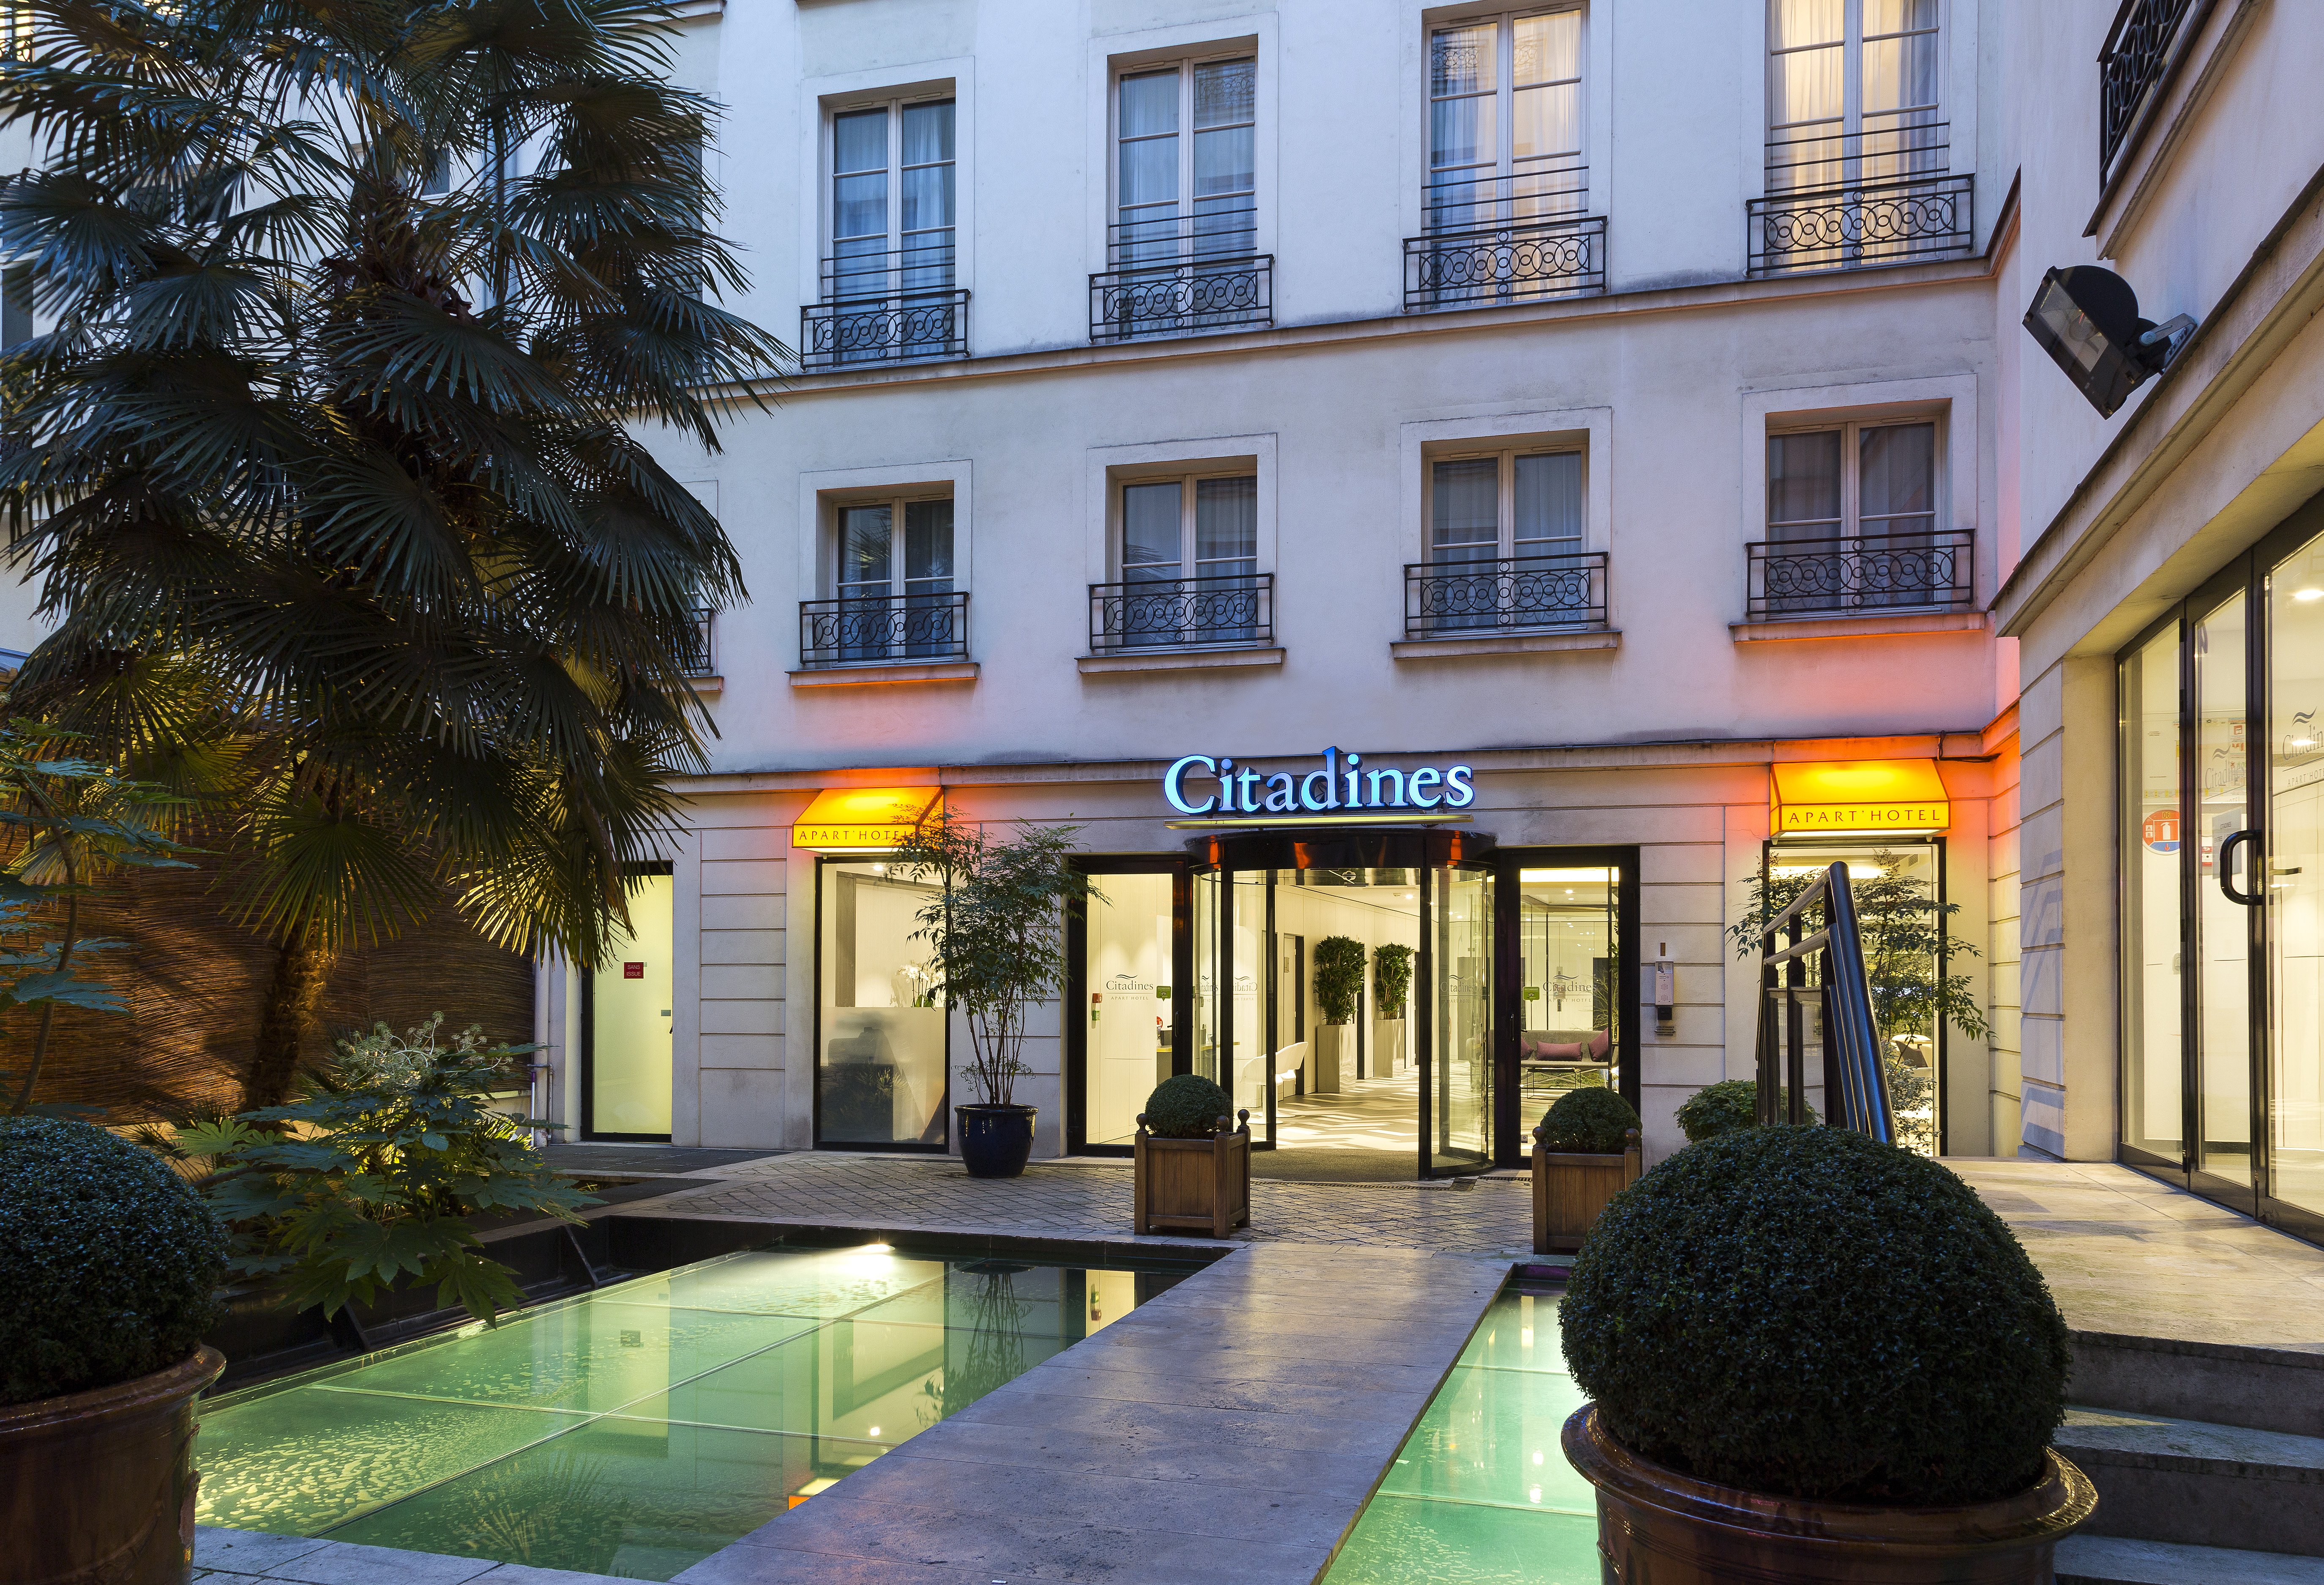 Citadines Opera Paris First Class Paris France Hotels Gds Reservation Codes Travel Weekly